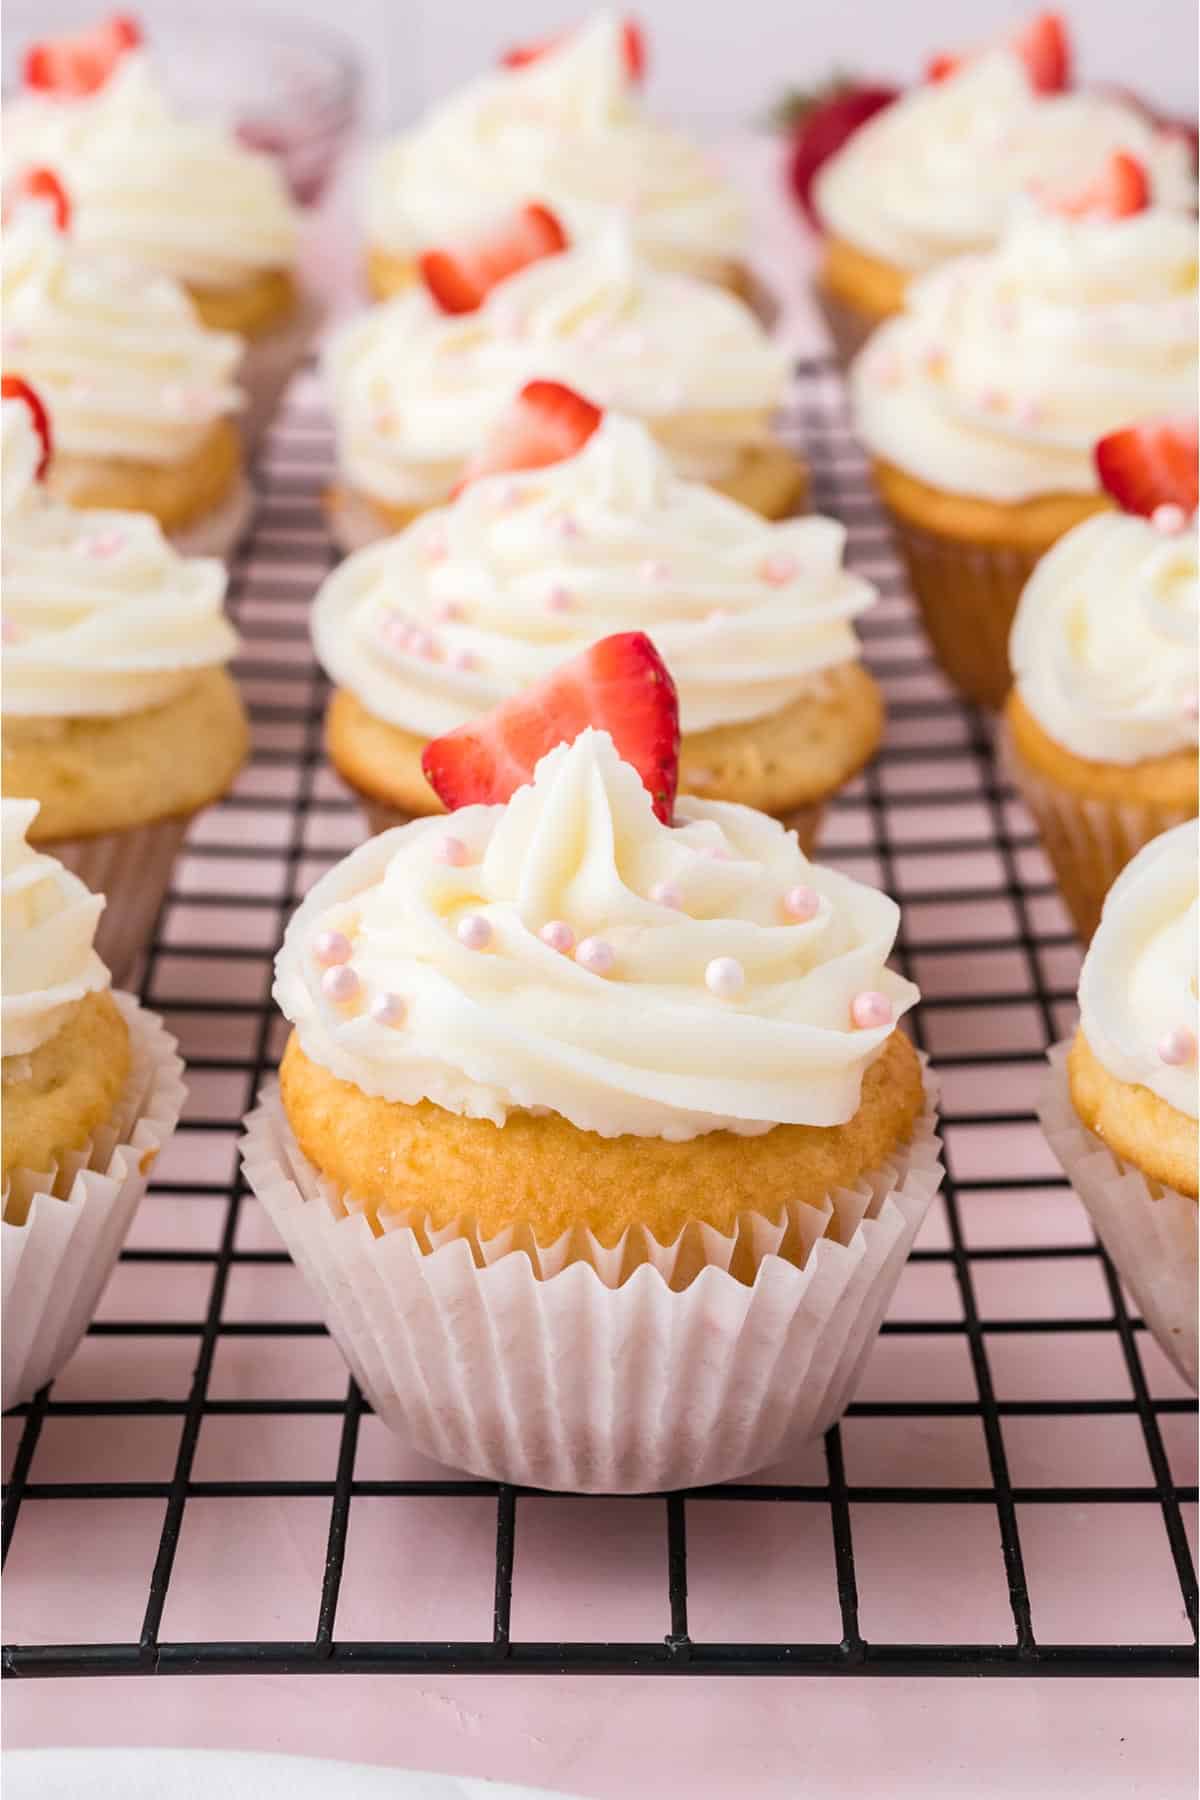 Strawberry cupcakes on a wire rack ready to eat.